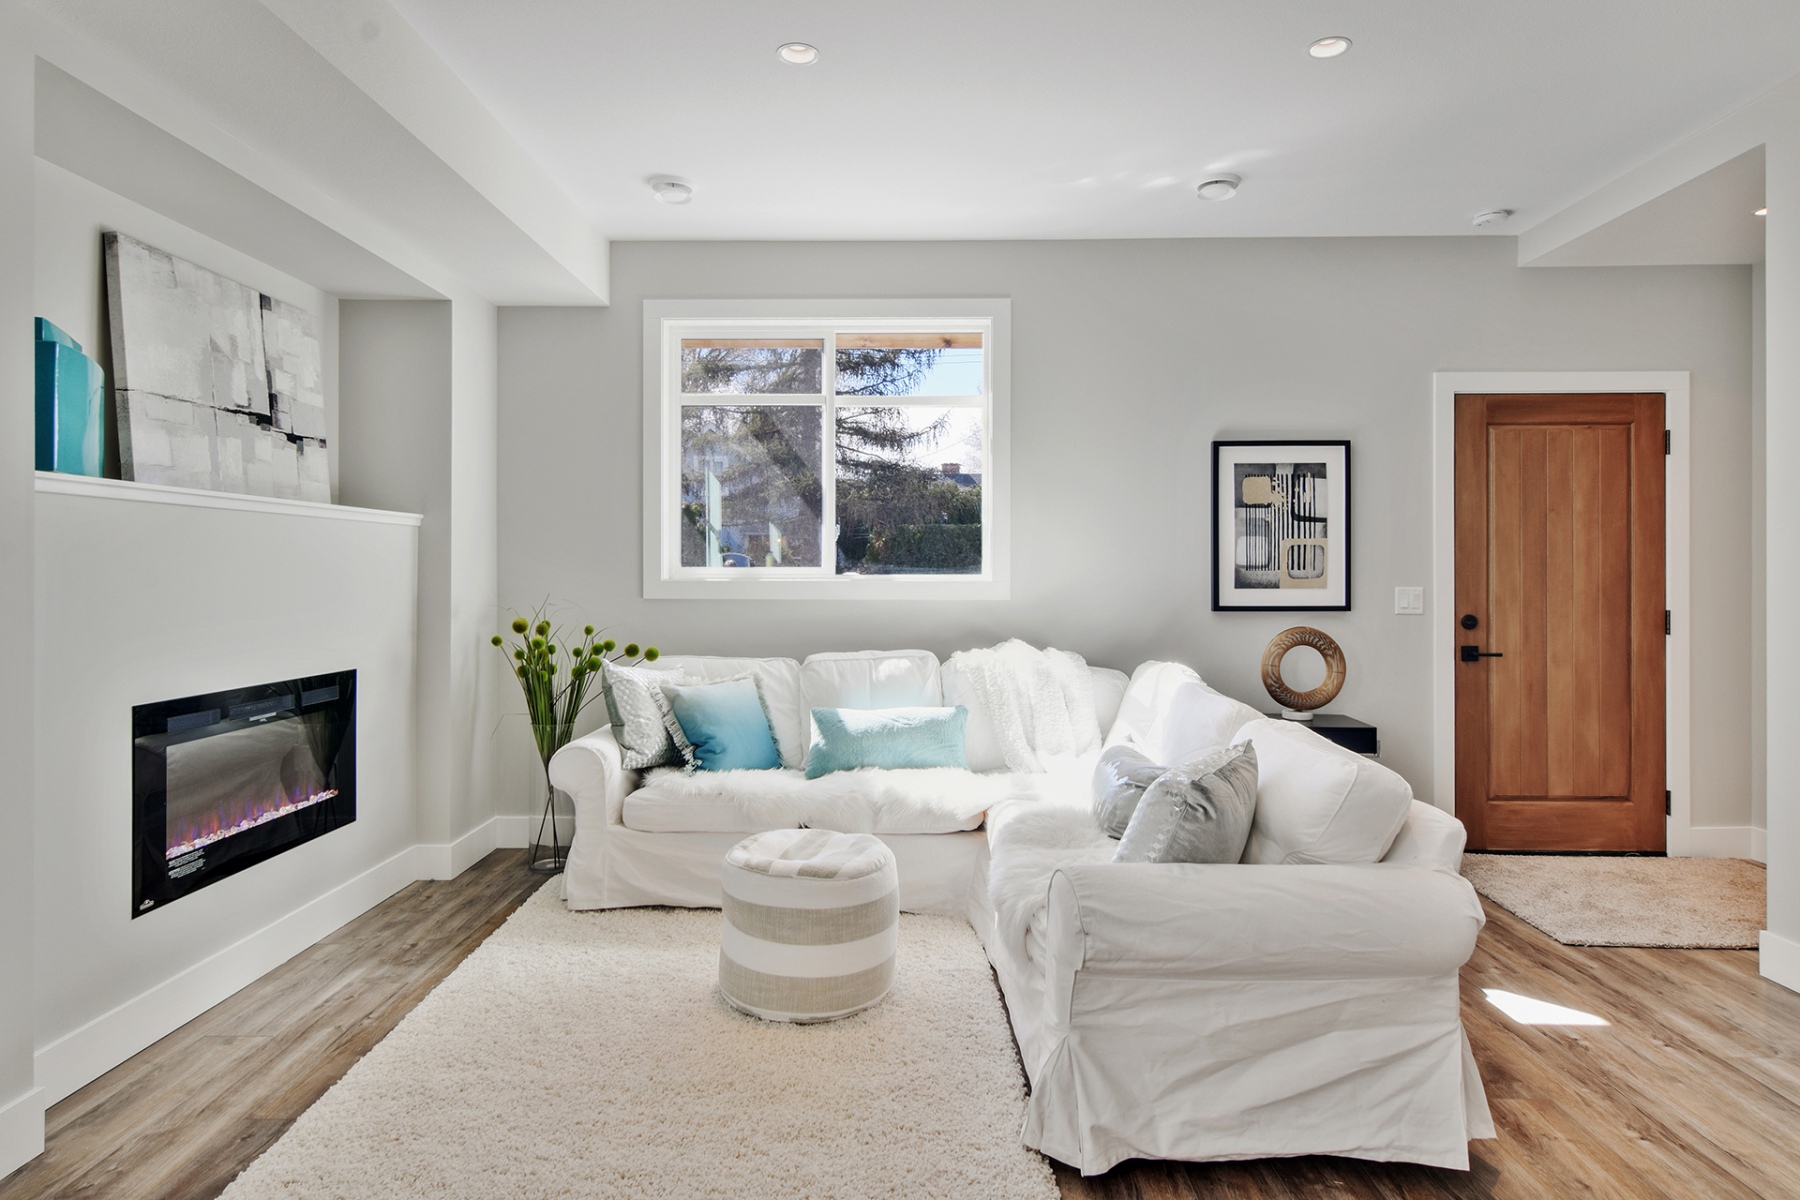 1_harmony_homes_glenwood_infill_project_living_room_area_gallery_image_9